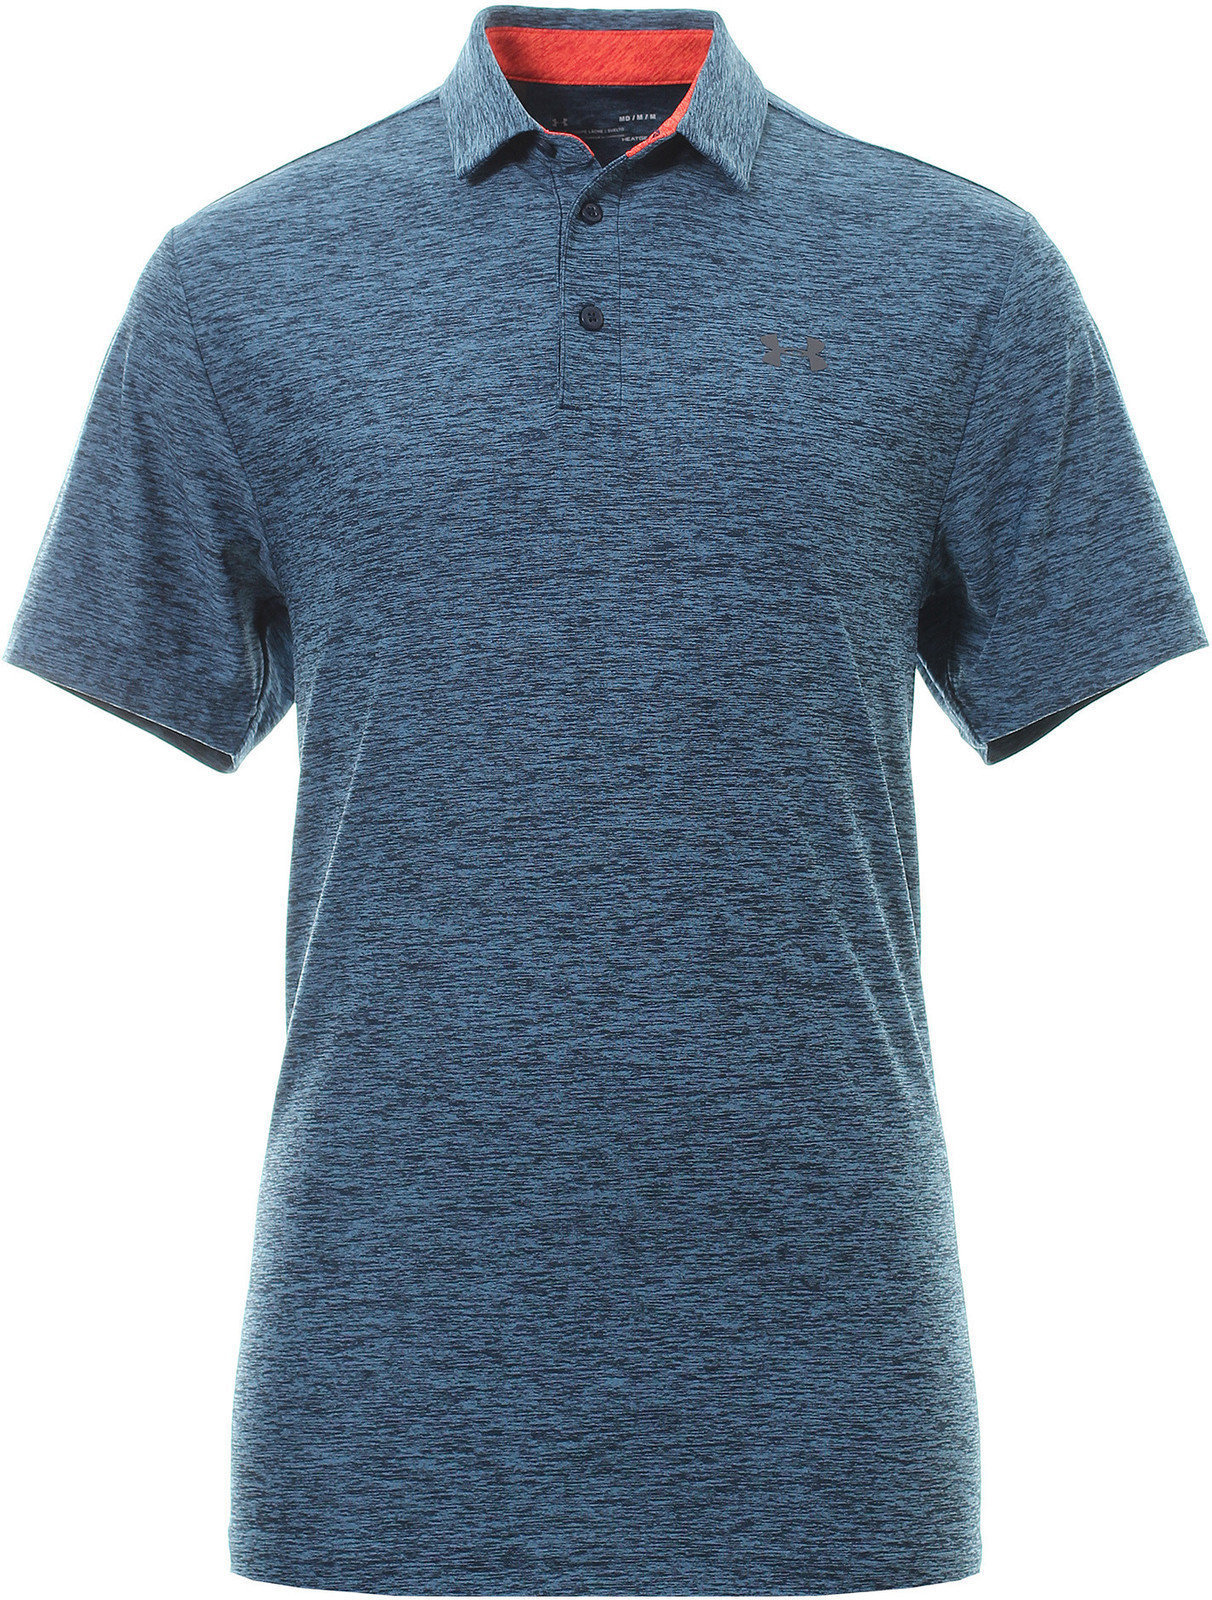 Polo Shirt Under Armour Playoff Polo Navy Heather L